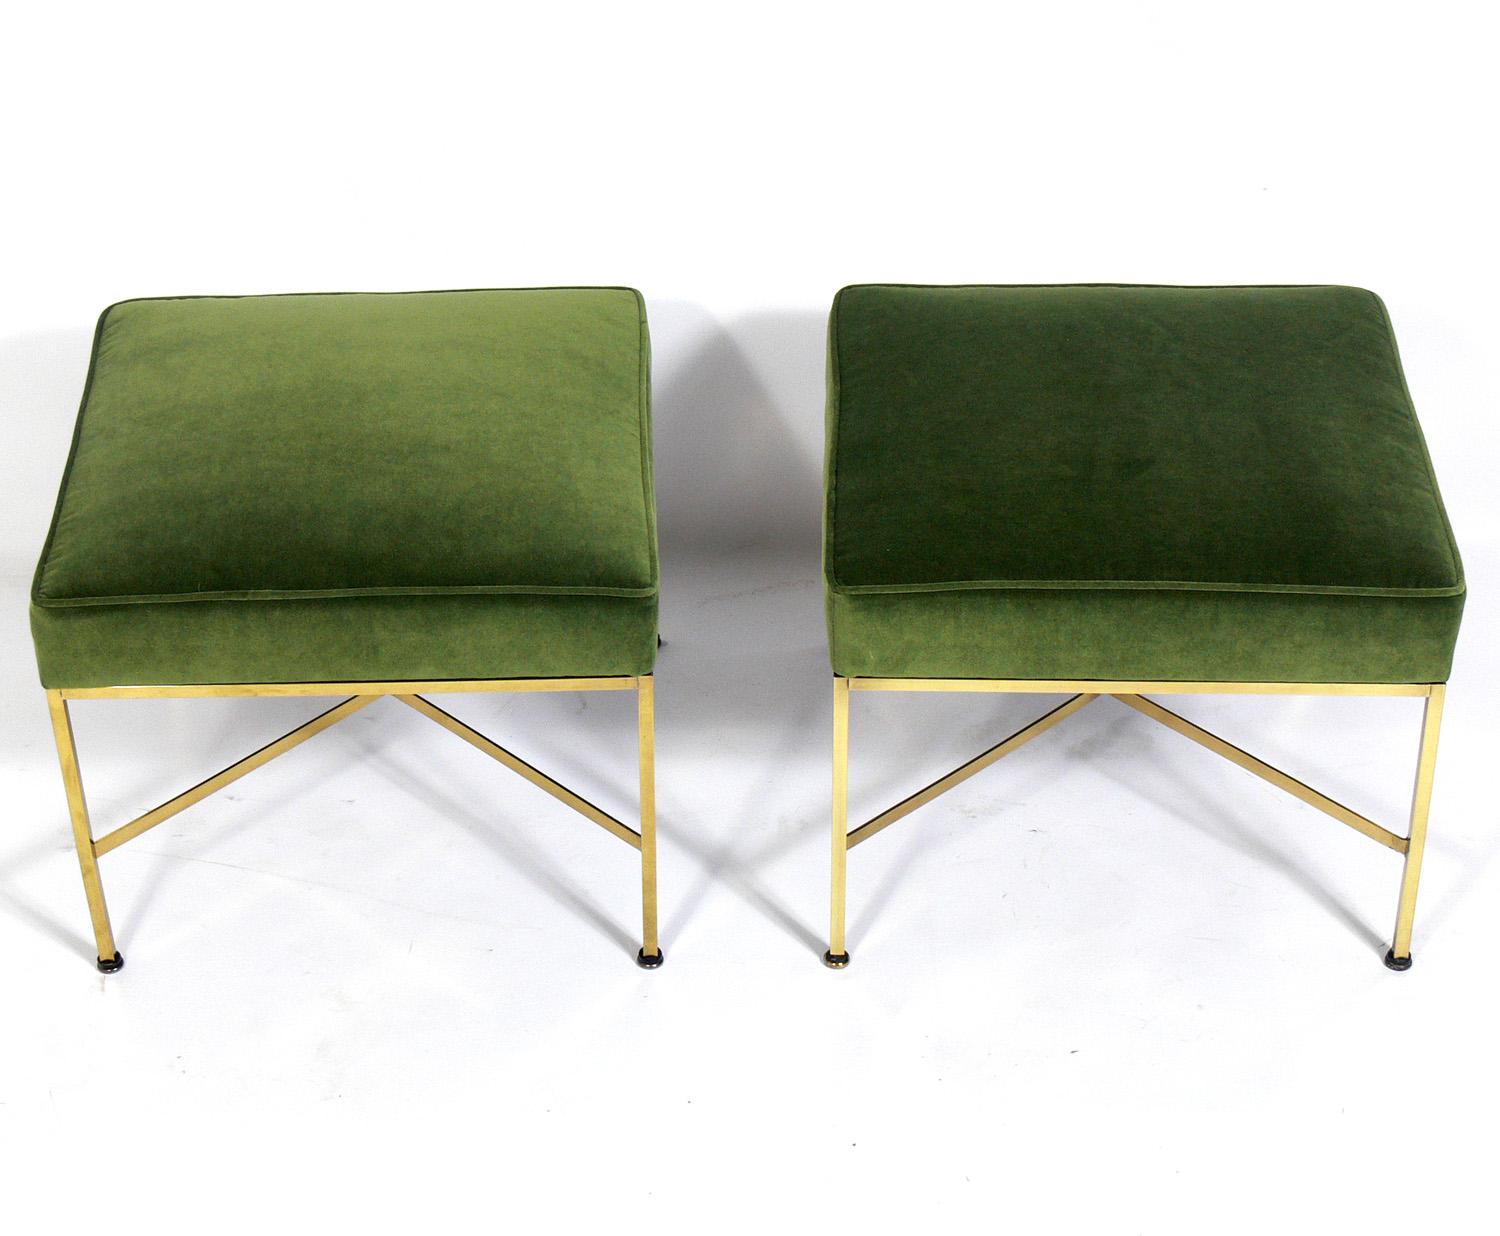 Pair of modern brass X-stools, designed by Paul McCobb, American, circa 1950s. They have been polished and lacquered and reupholstered in a fern green color velvet.